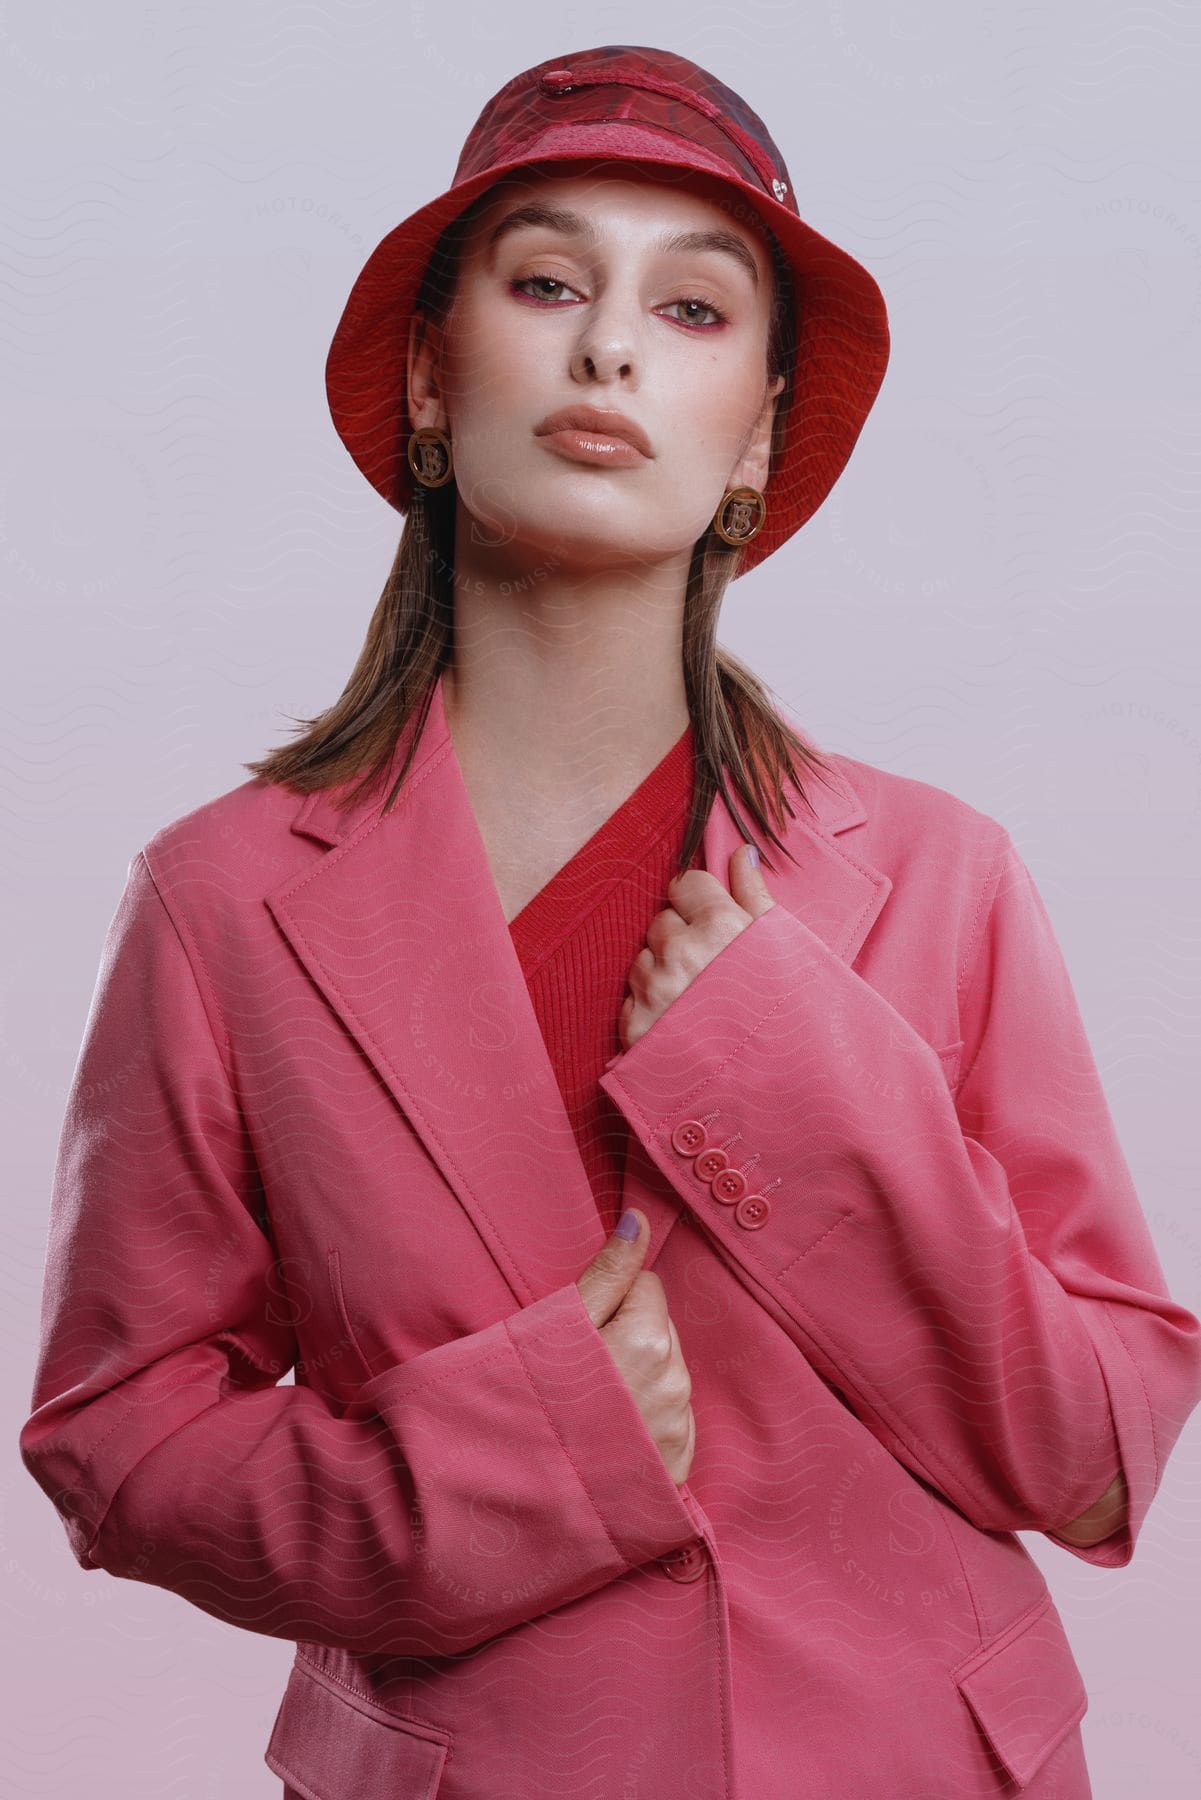 A Women Is Posing In A Pink Blazer And Pink Makeup On